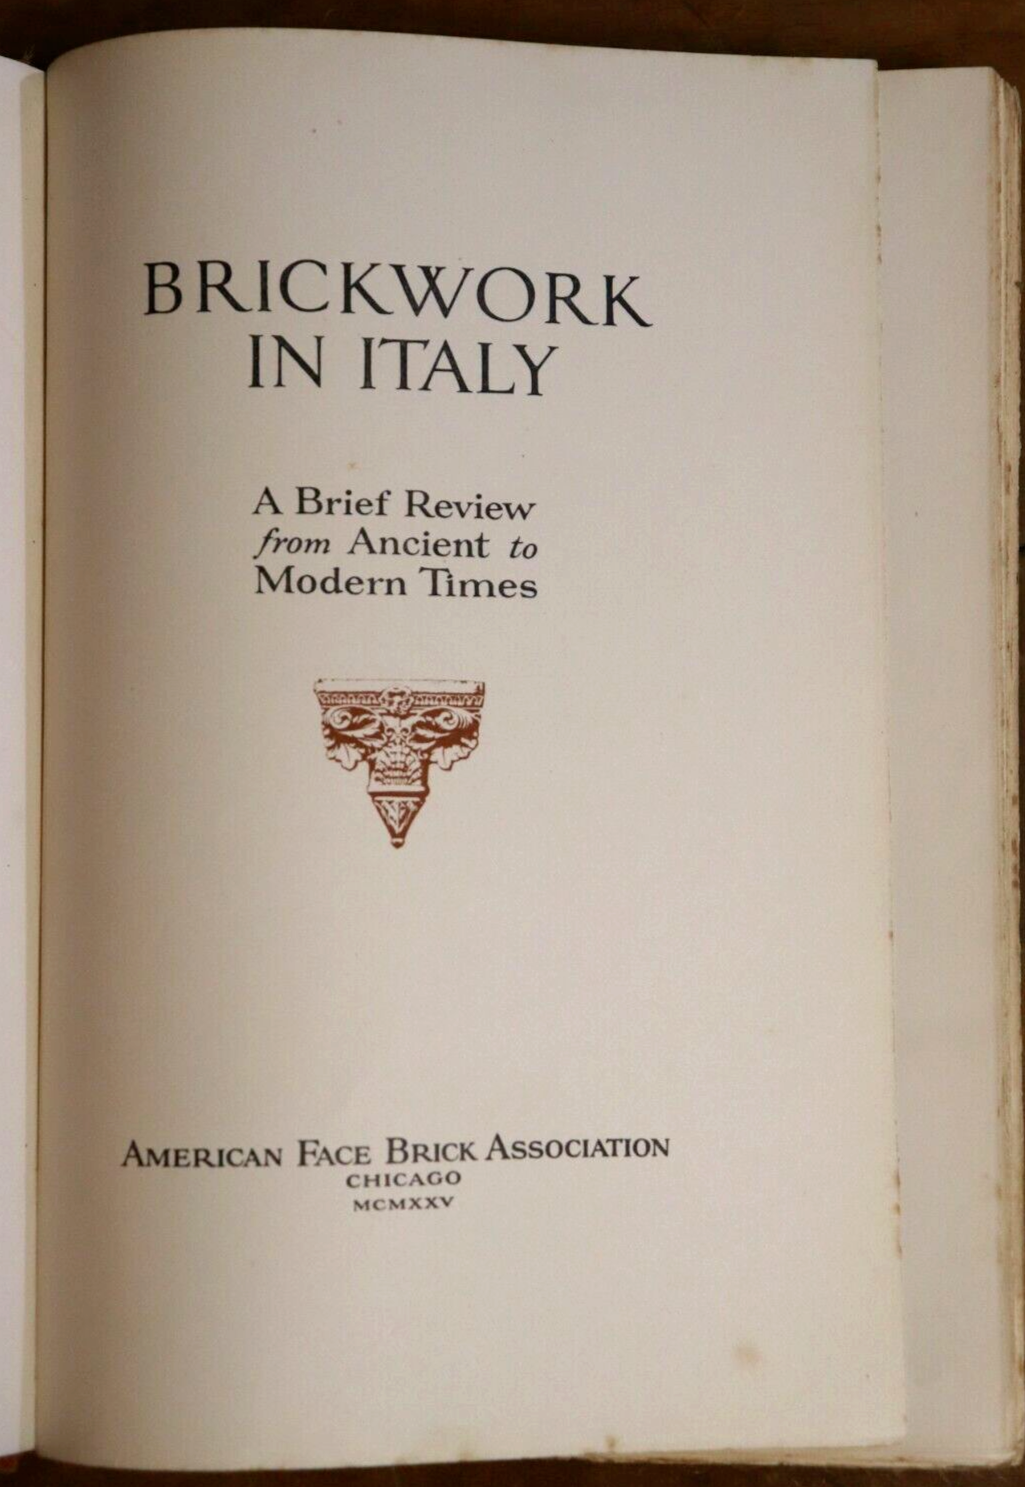 1925 Brickwork In Italy by GC Mars 1st Edition Architecture Book - 0